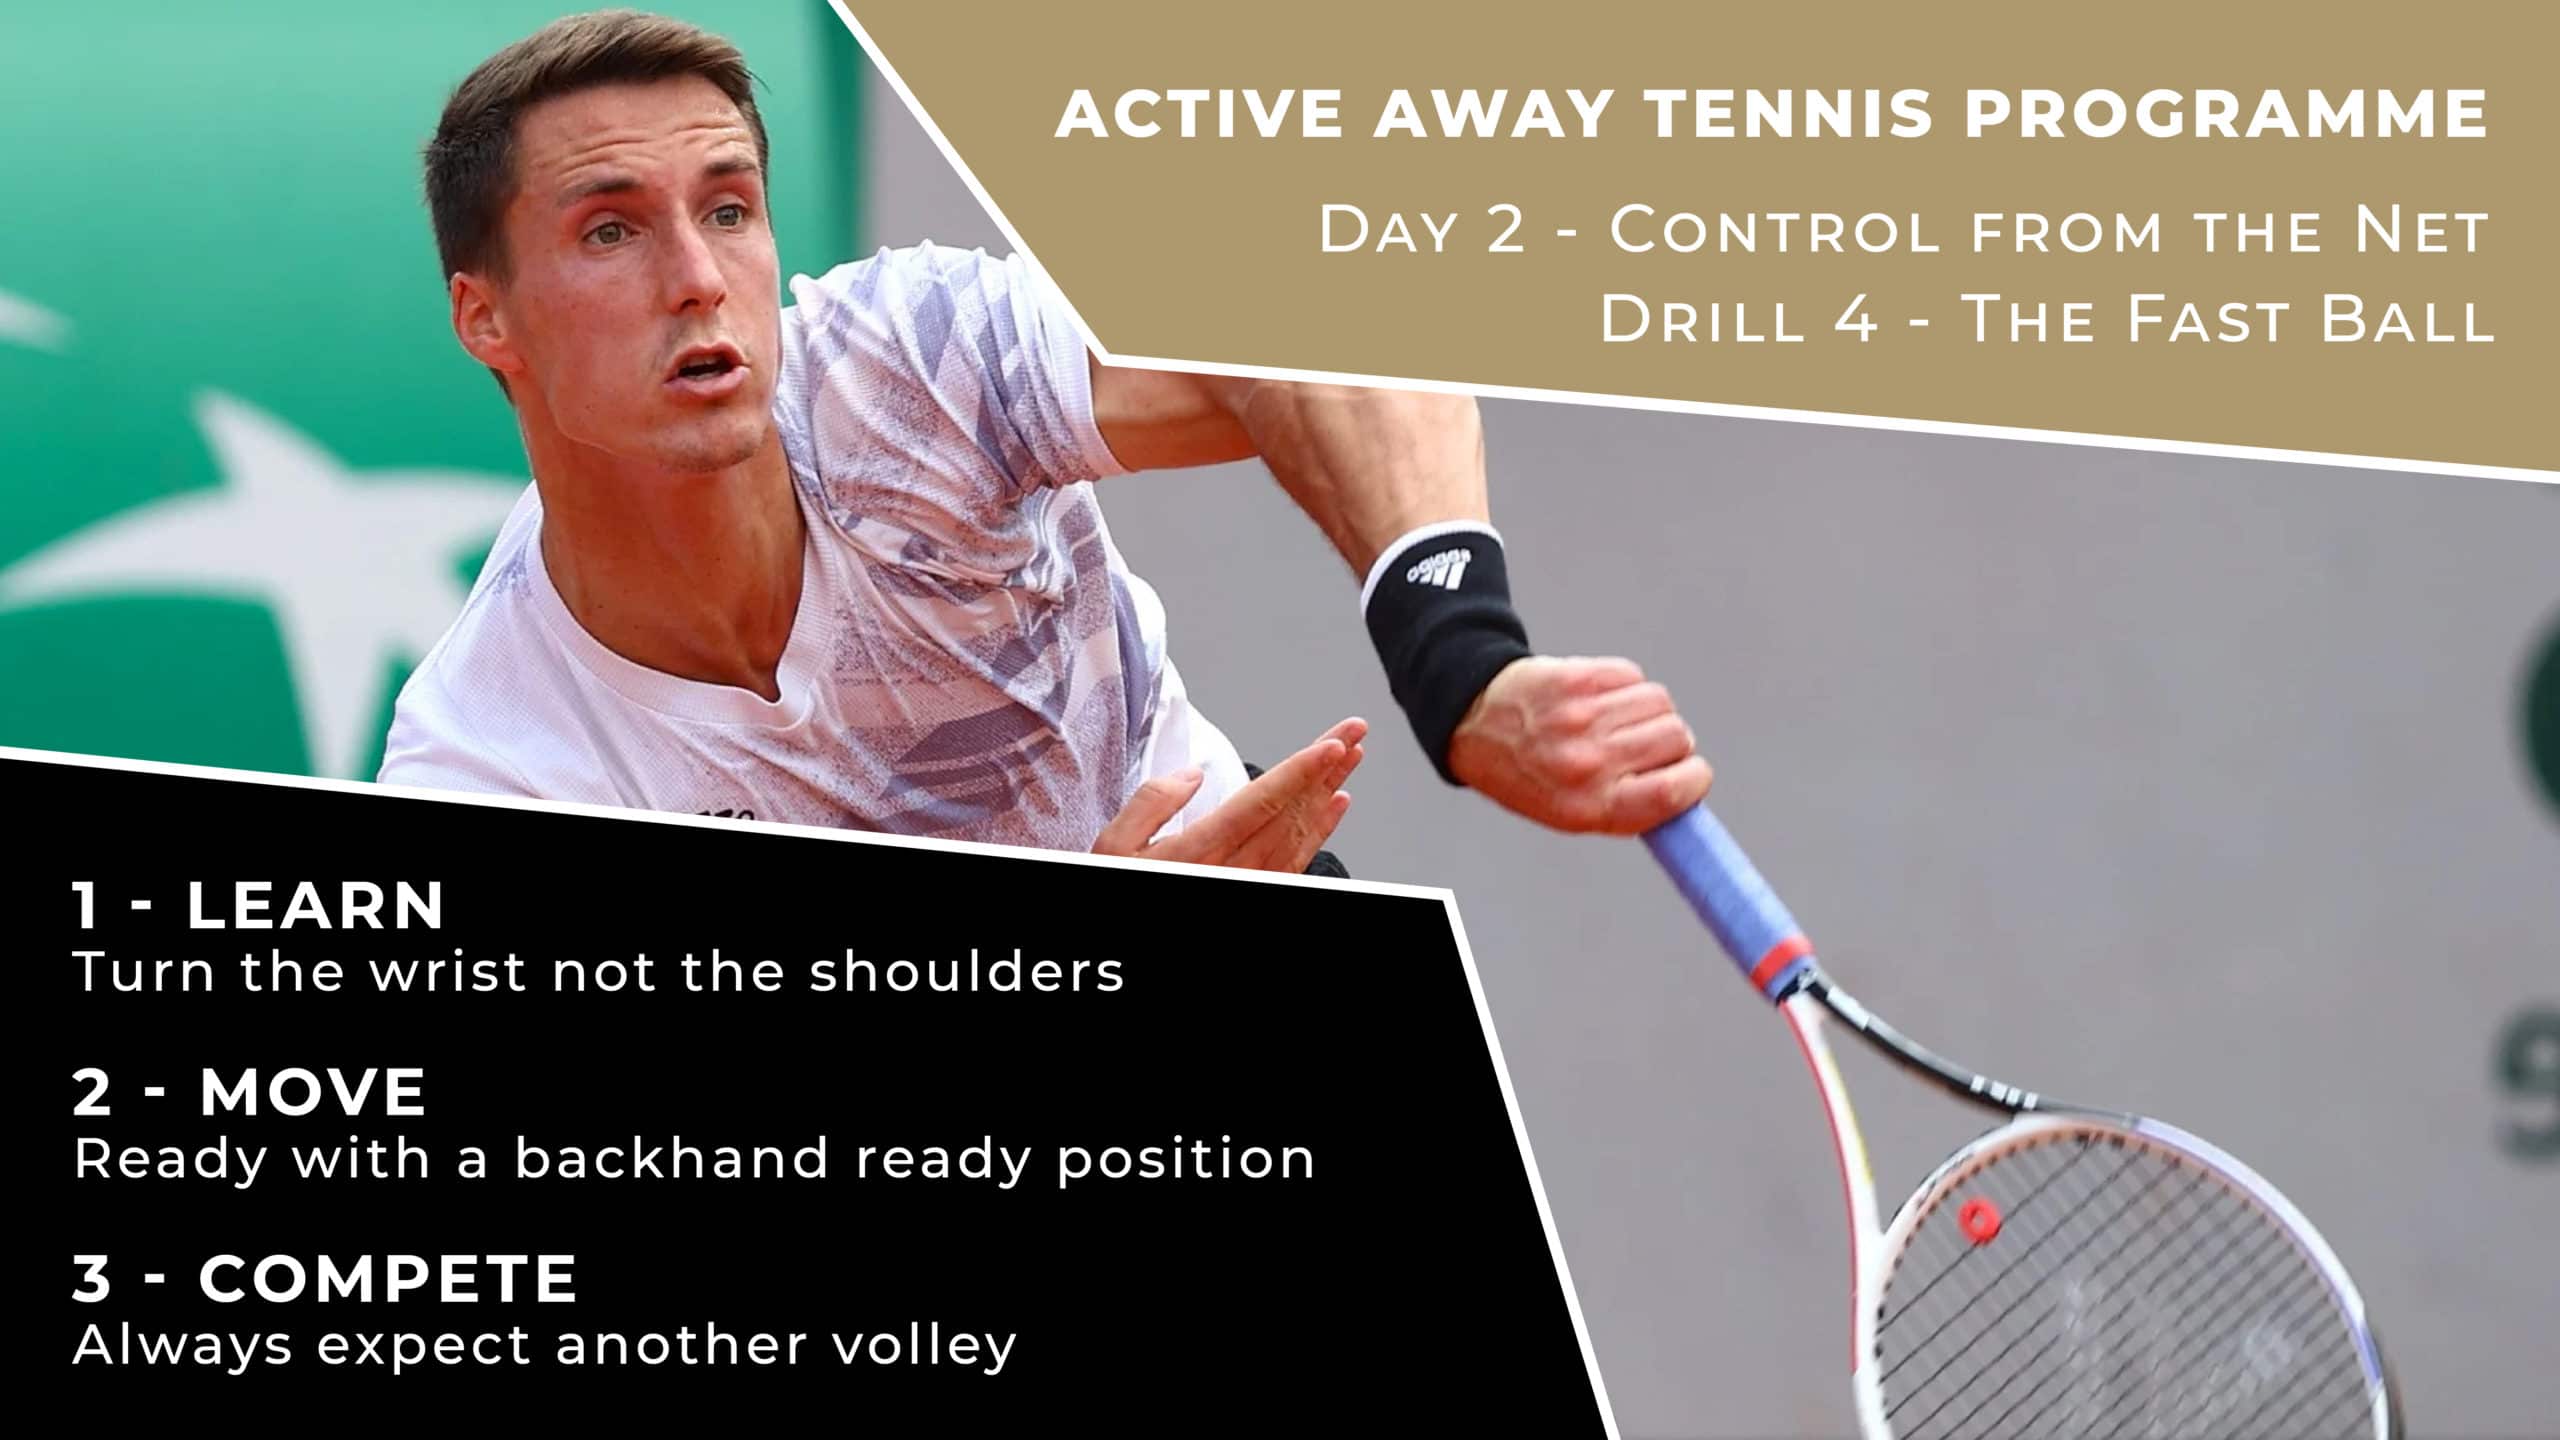 Day 2 - Control The Net Drill 4 - The Fast Ball | Active Away Tennis Programme